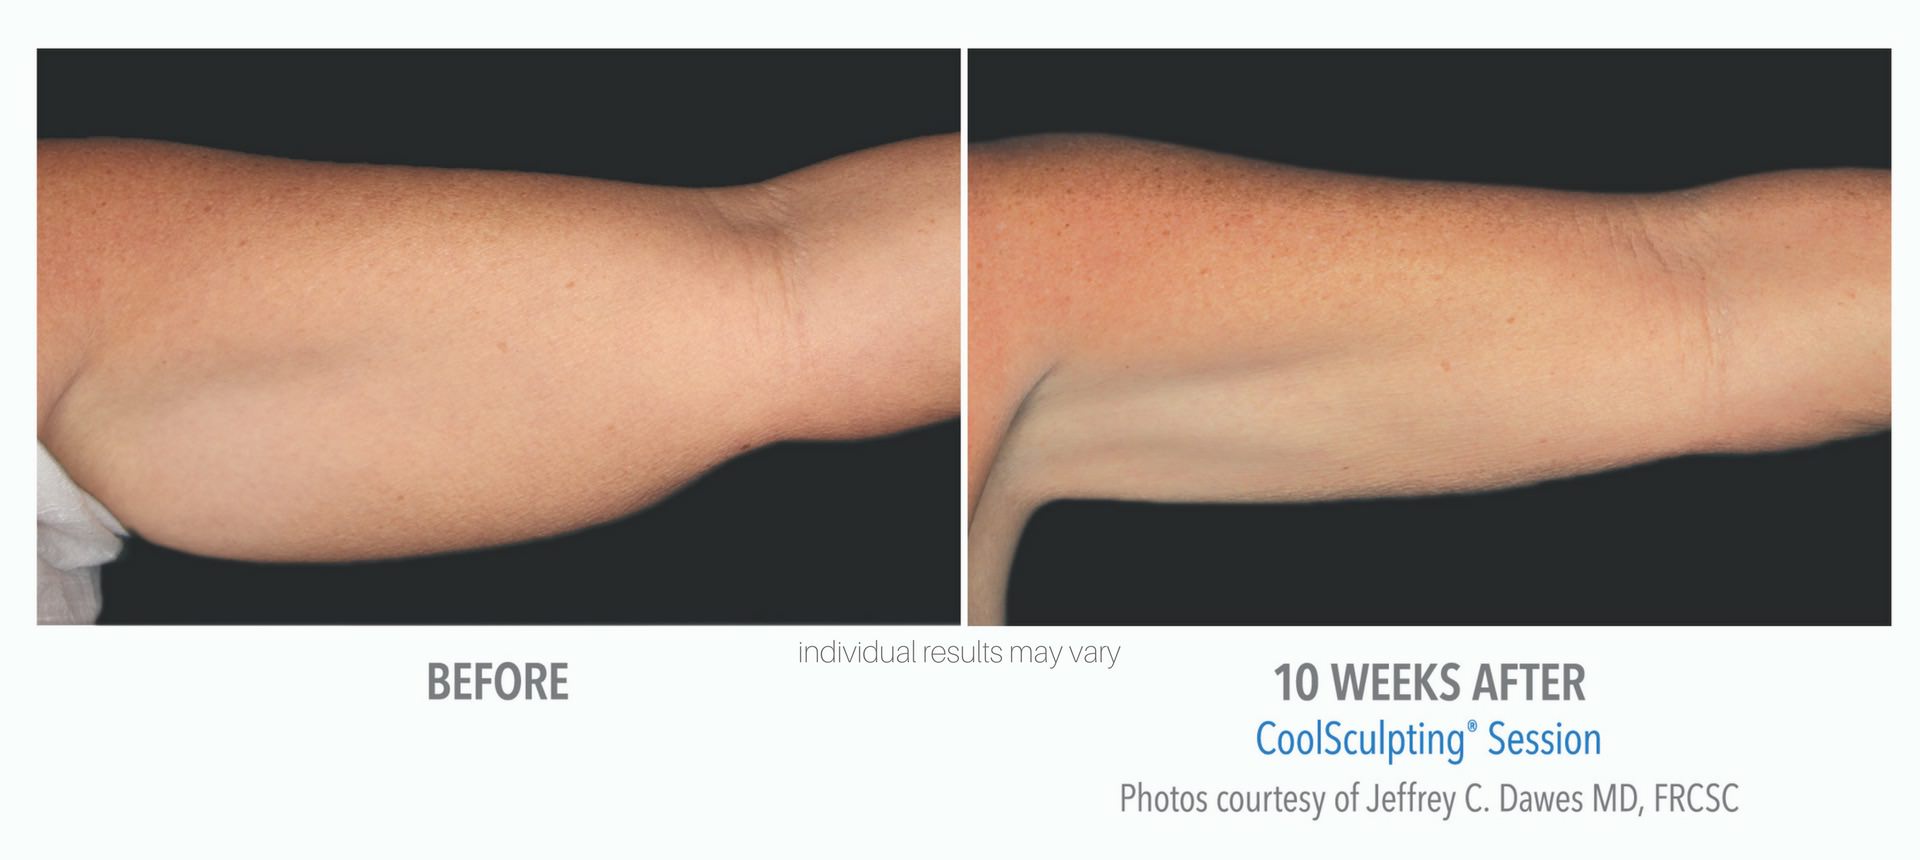 coolsculpting results for arm fat